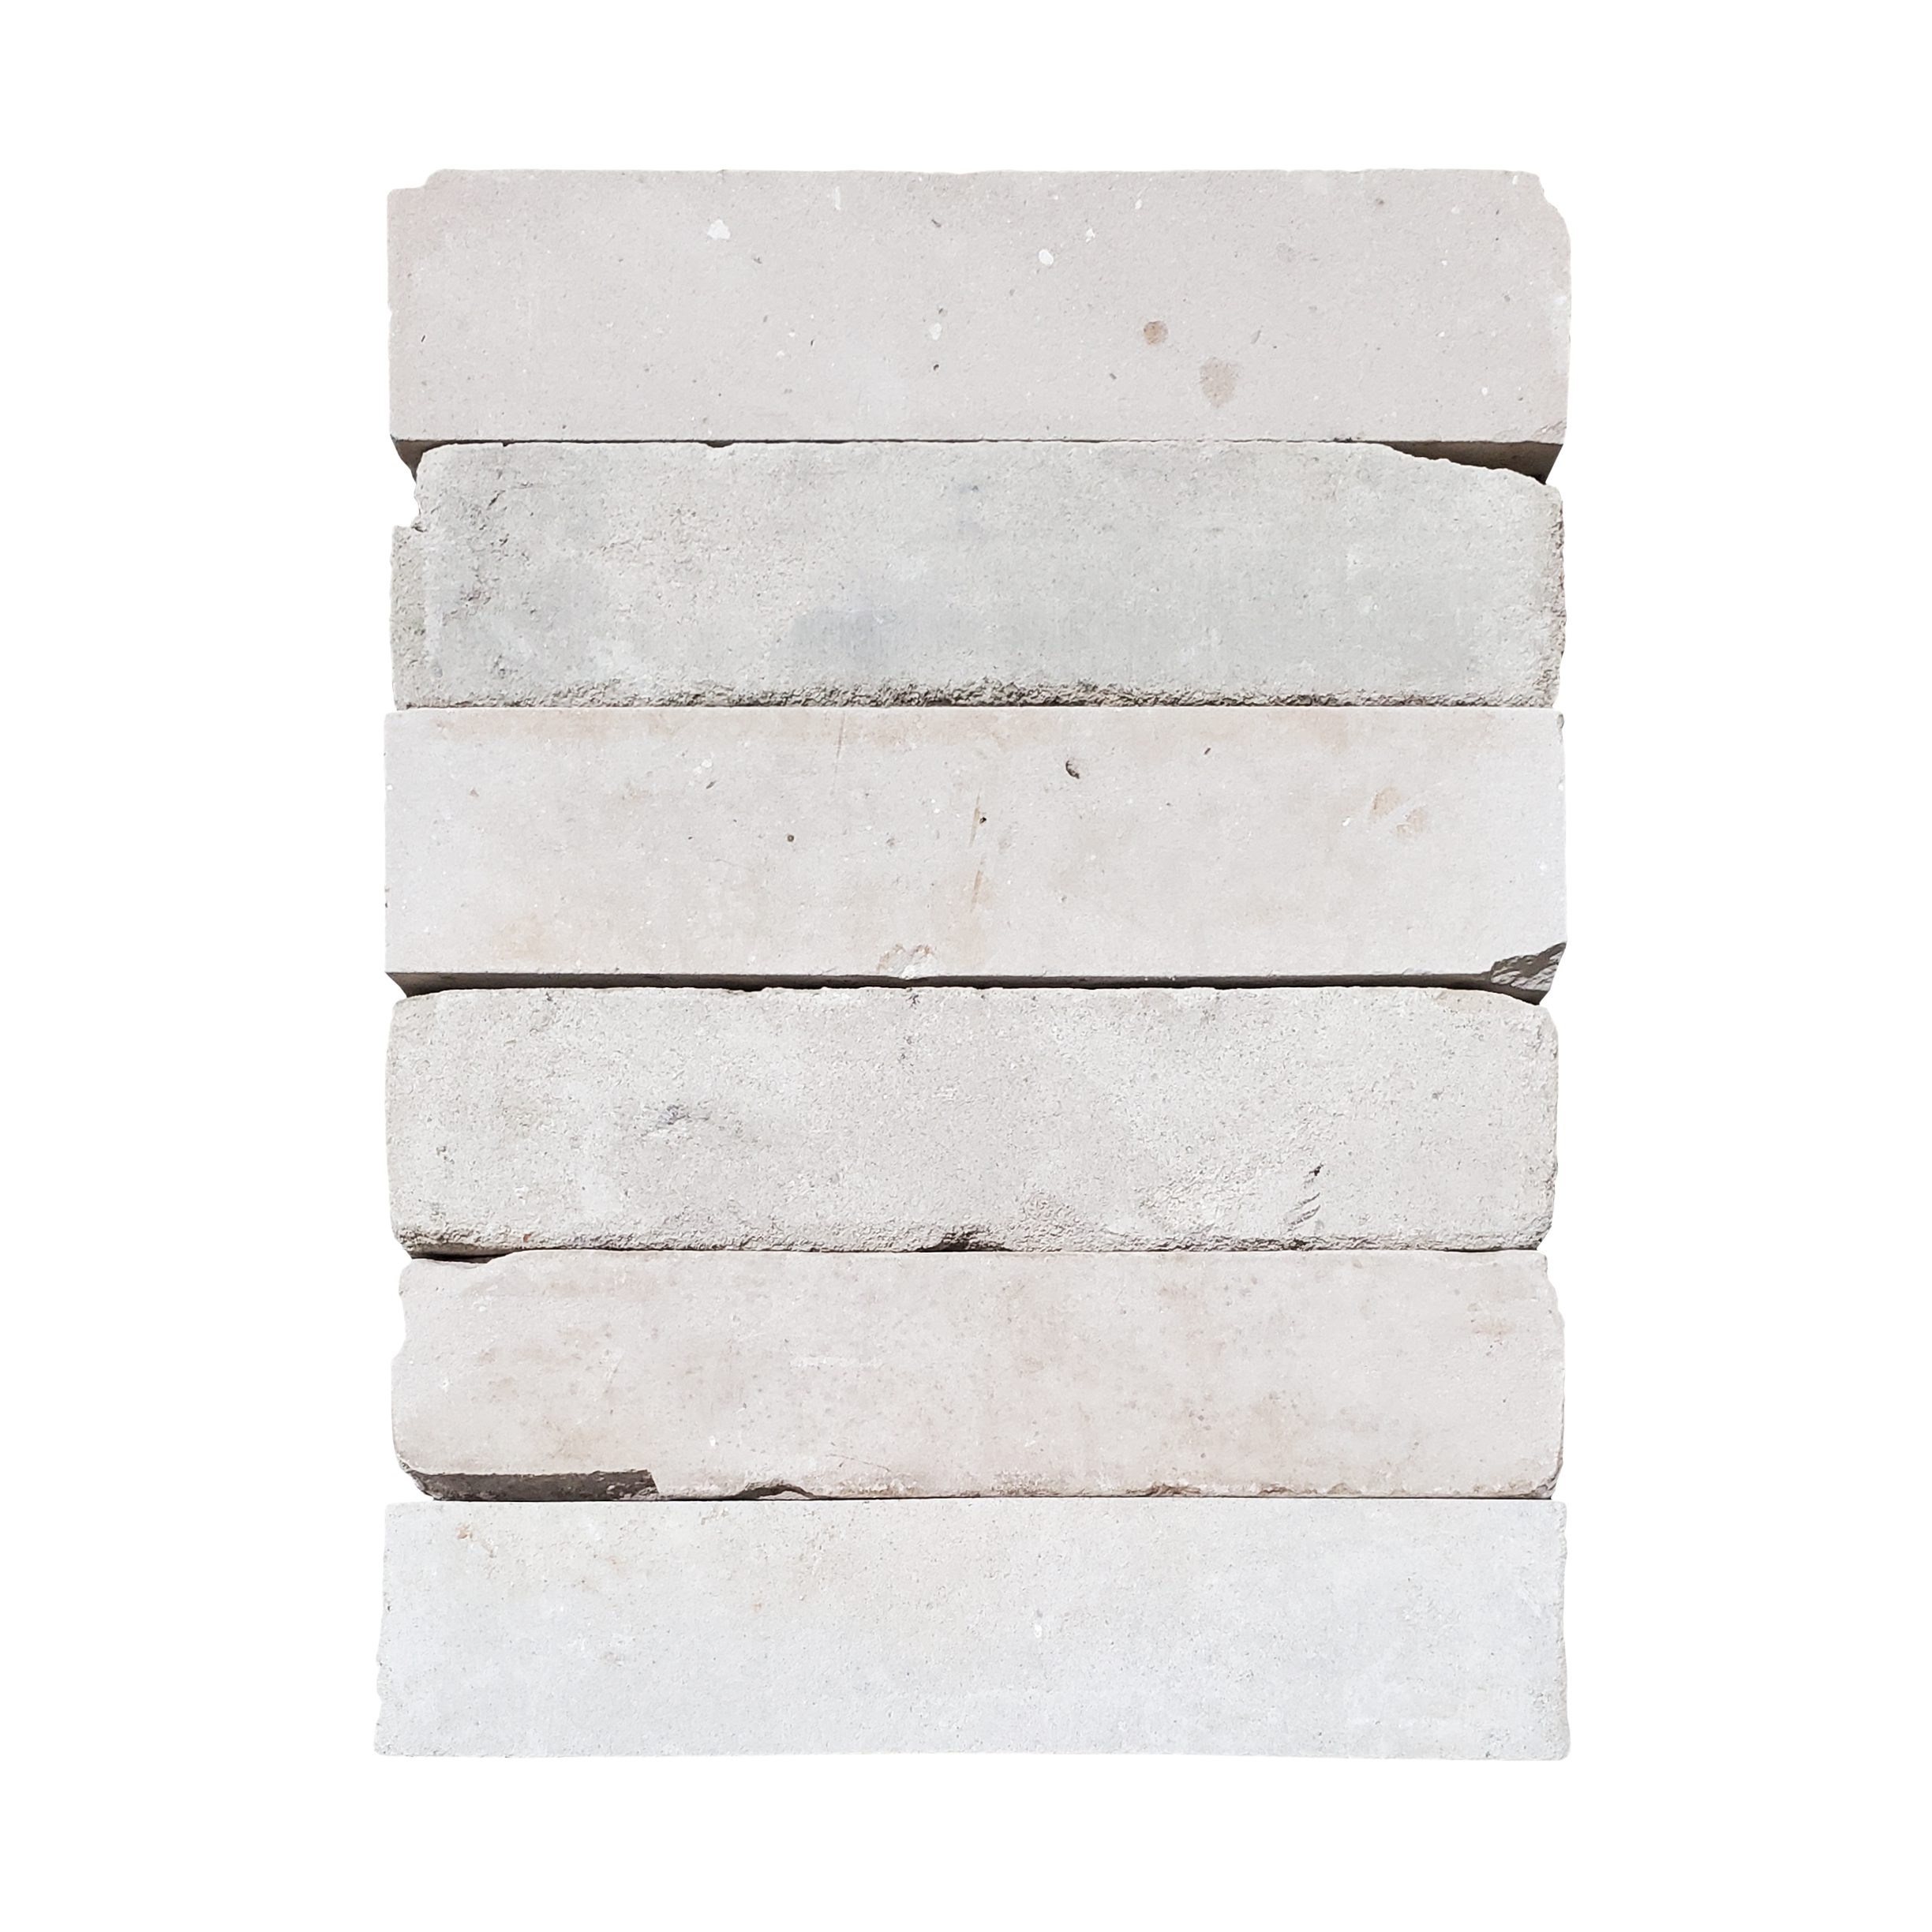 Reclaimed Old Brick_White_6.20sfct_15.29_8.99